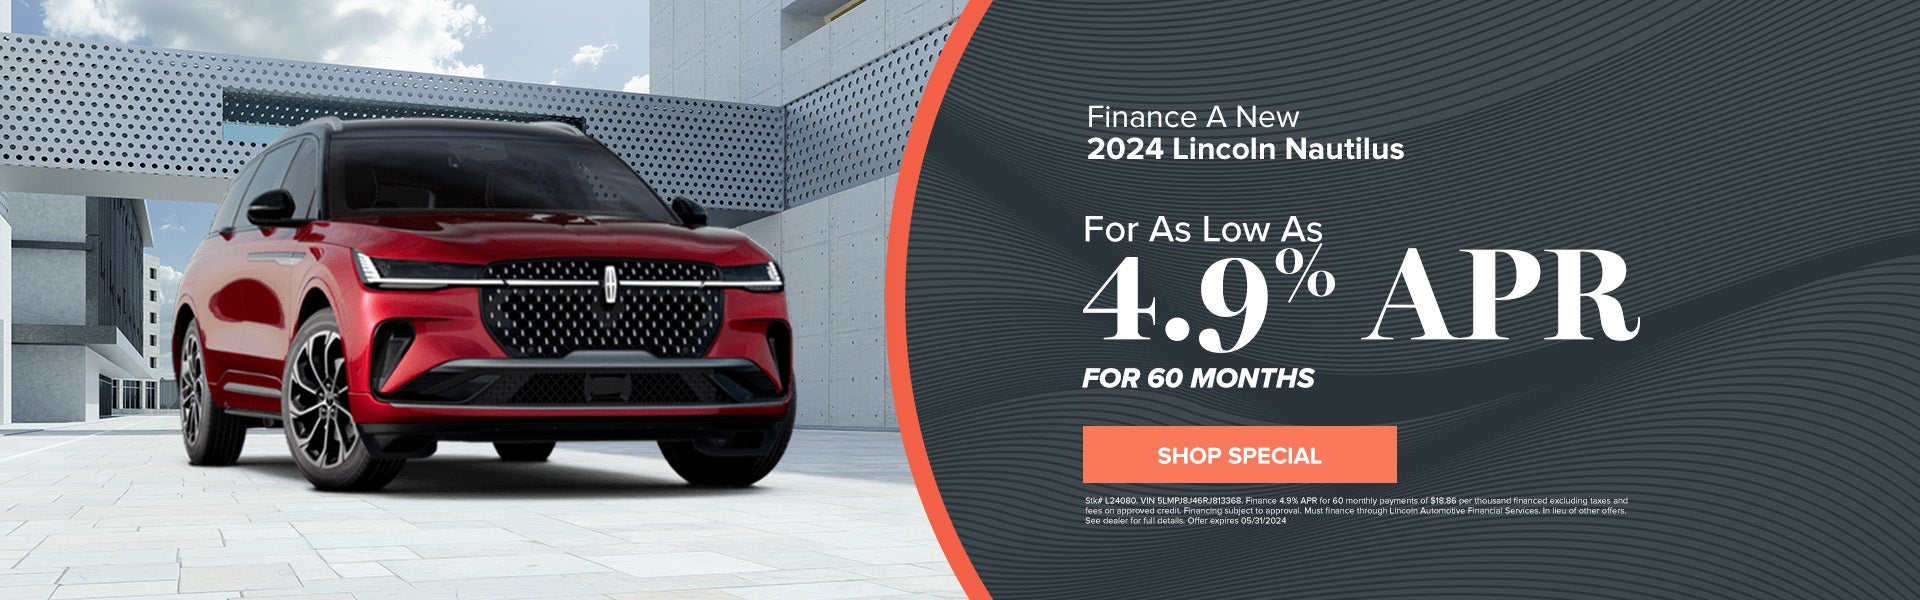 Finance a new 2024 Lincoln Nautilus for 4.9% APR For 60 Mon